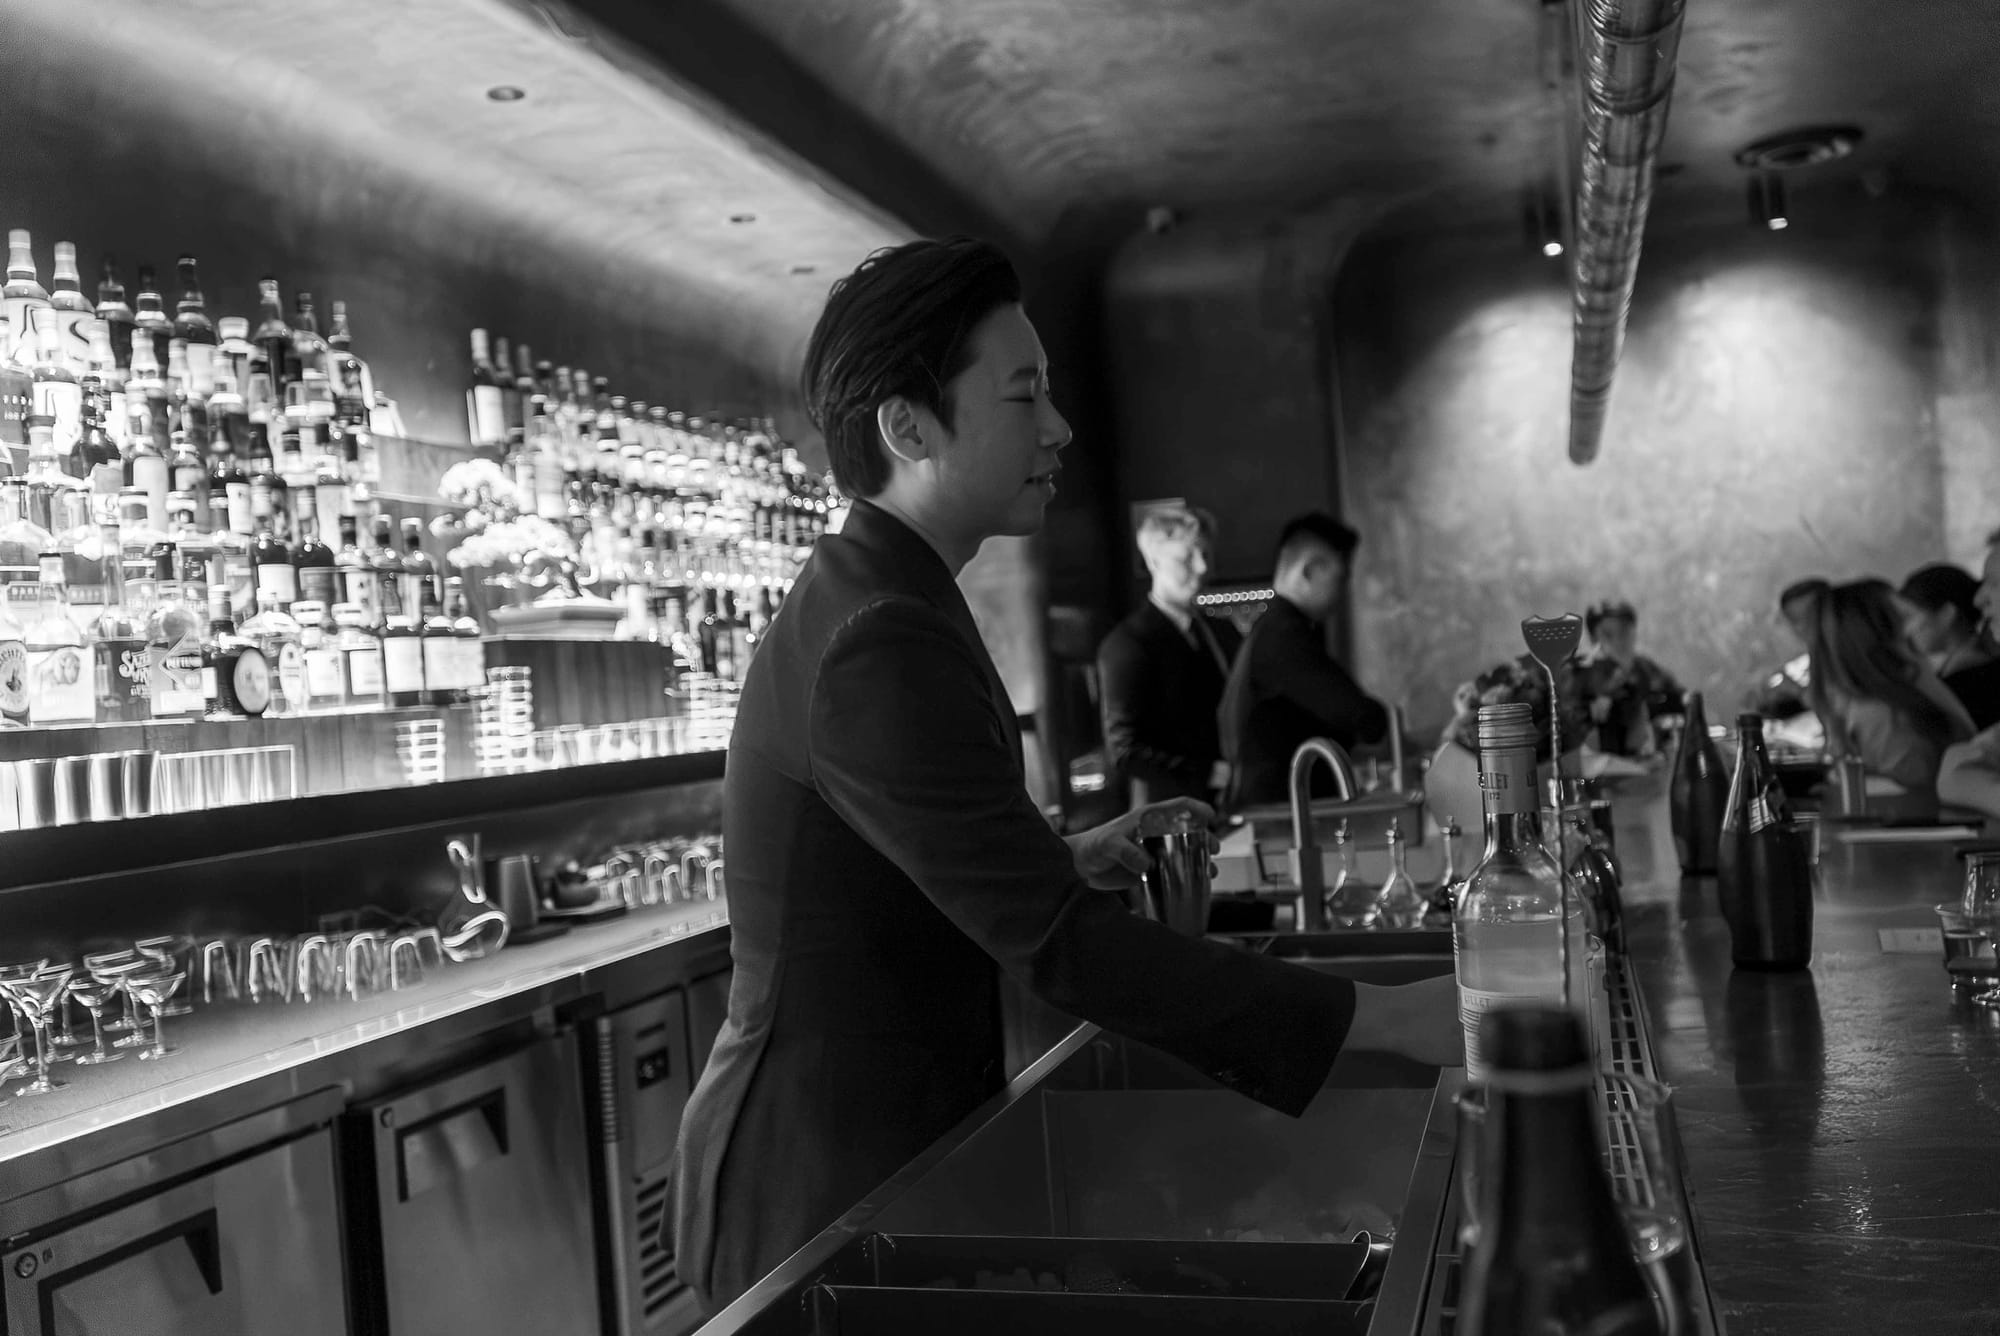 When at work behind the stick at Bar Sumi. Photo: Boothby